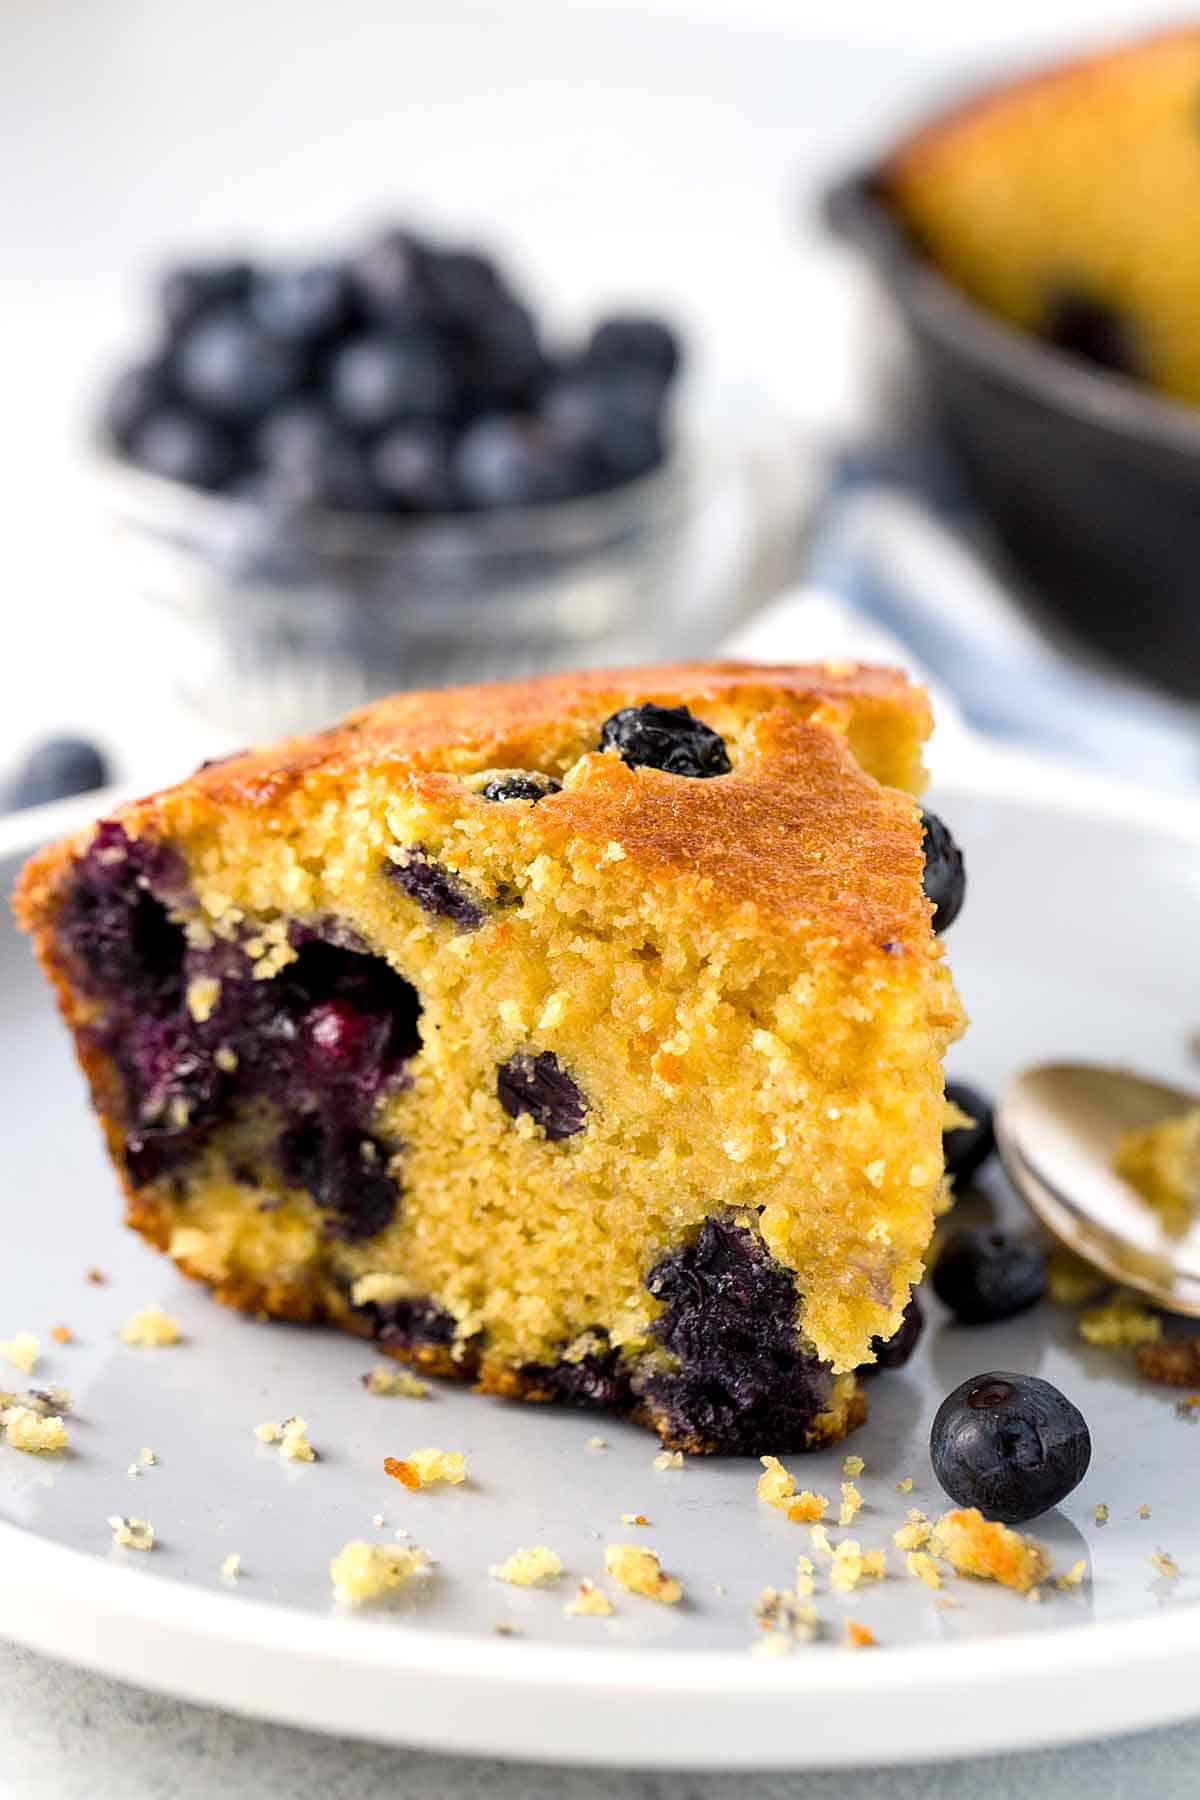 Corn flour, blueberries and honey for a fruity bread from the pan